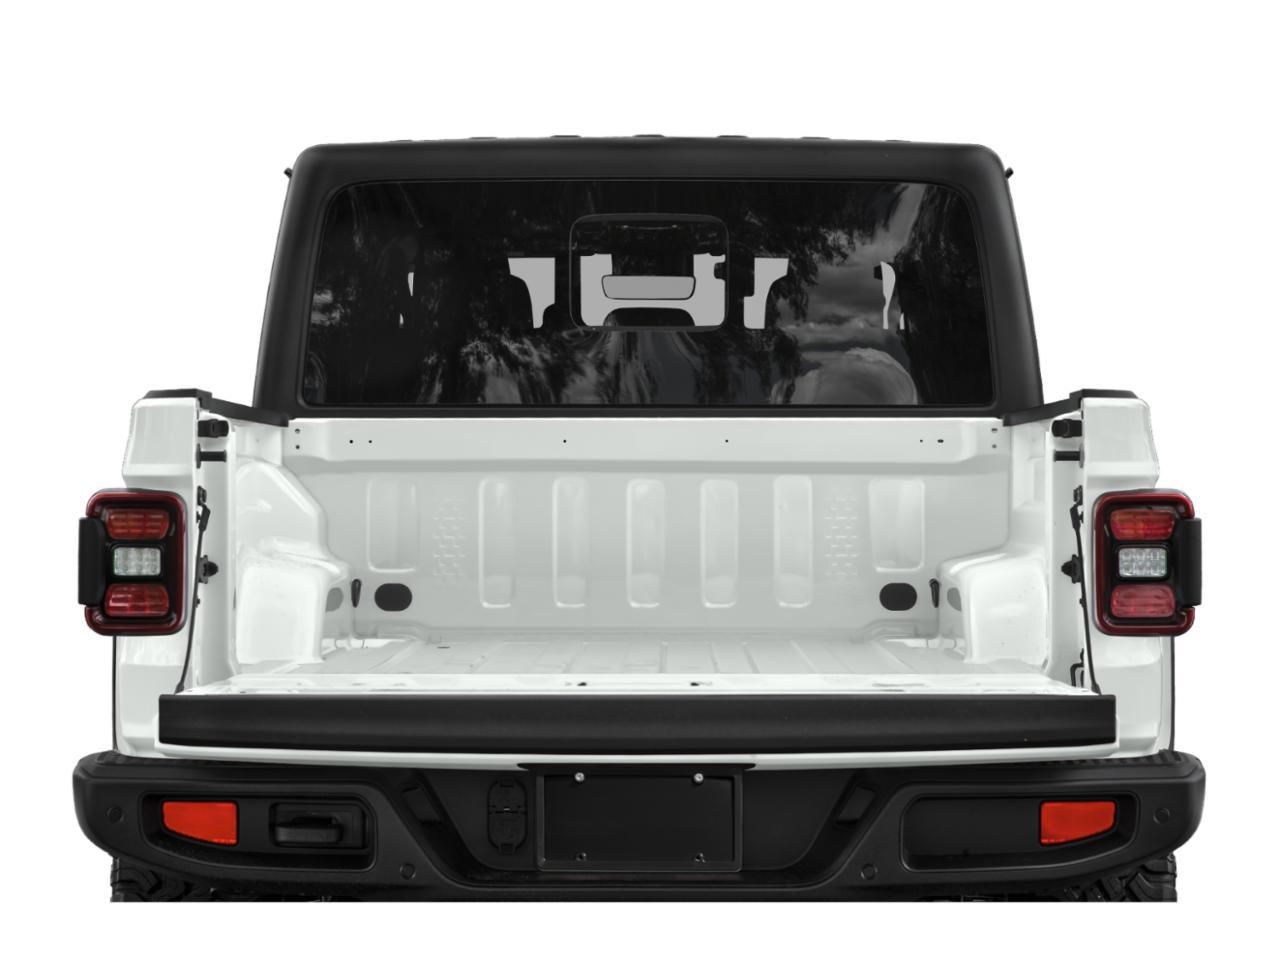 2021 Jeep Gladiator Vehicle Photo in Grapevine, TX 76051